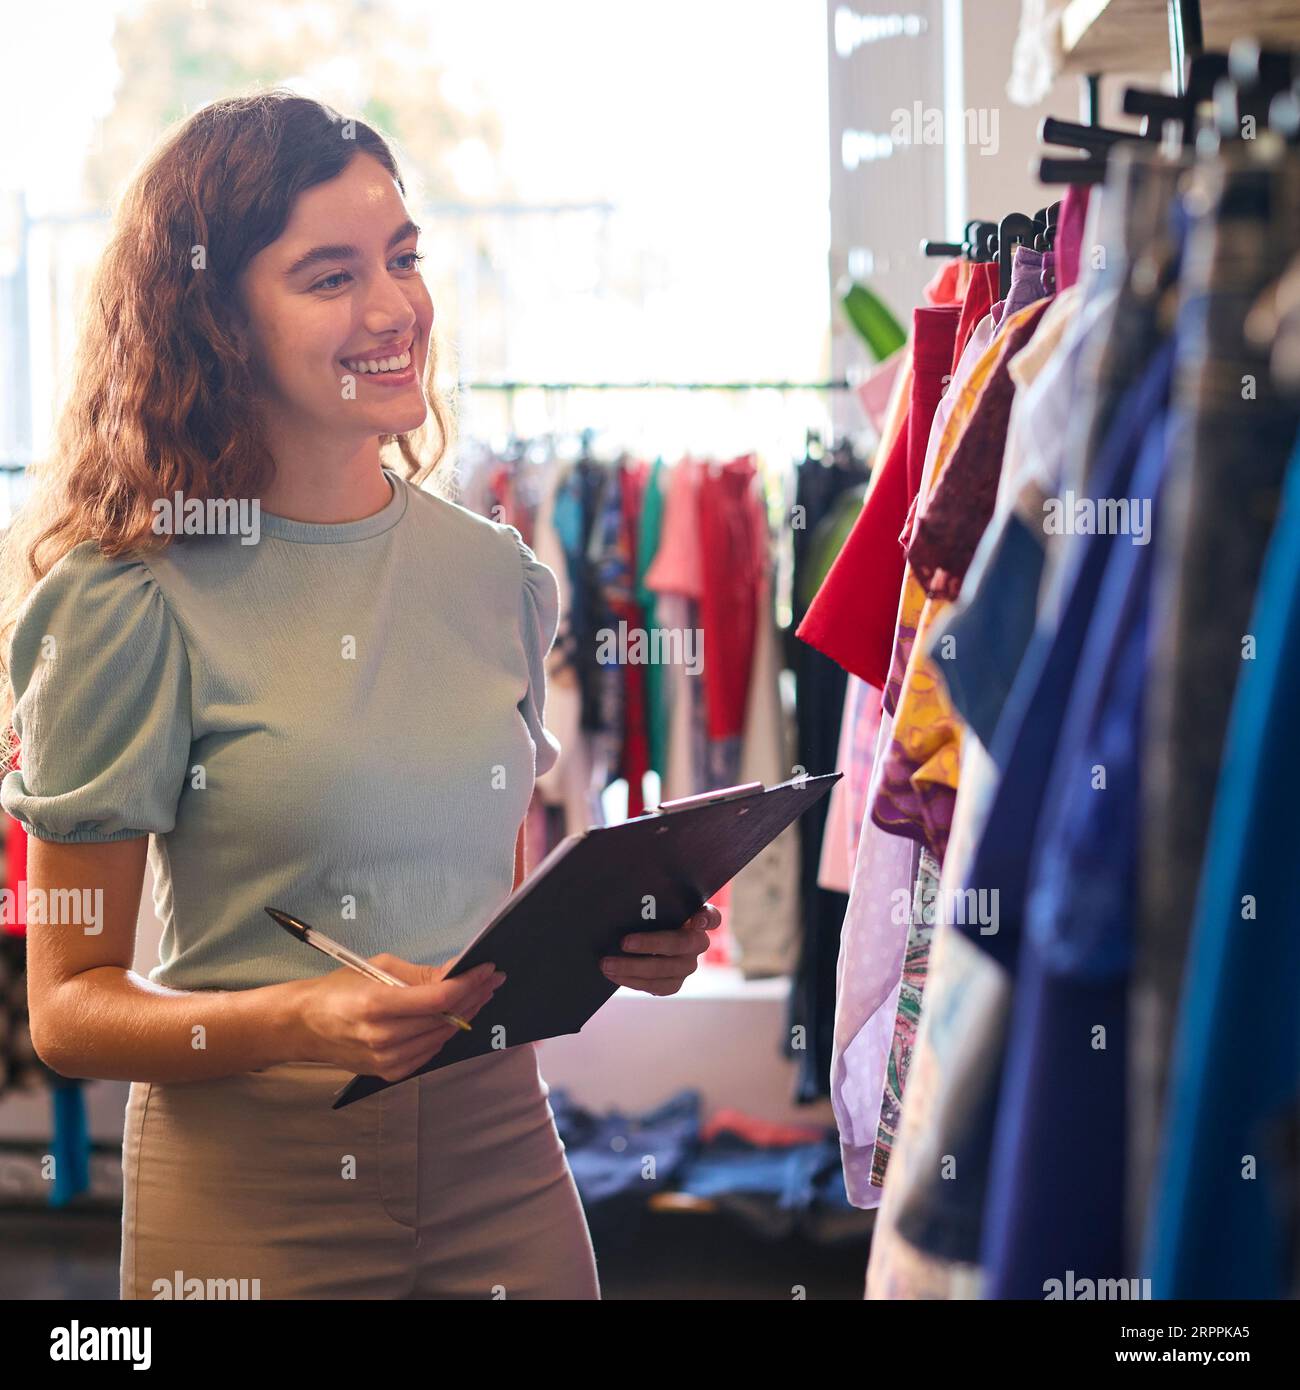 Female Owner Or Worker In Fashion Clothing Store Checking Stock With Clipboard Stock Photo